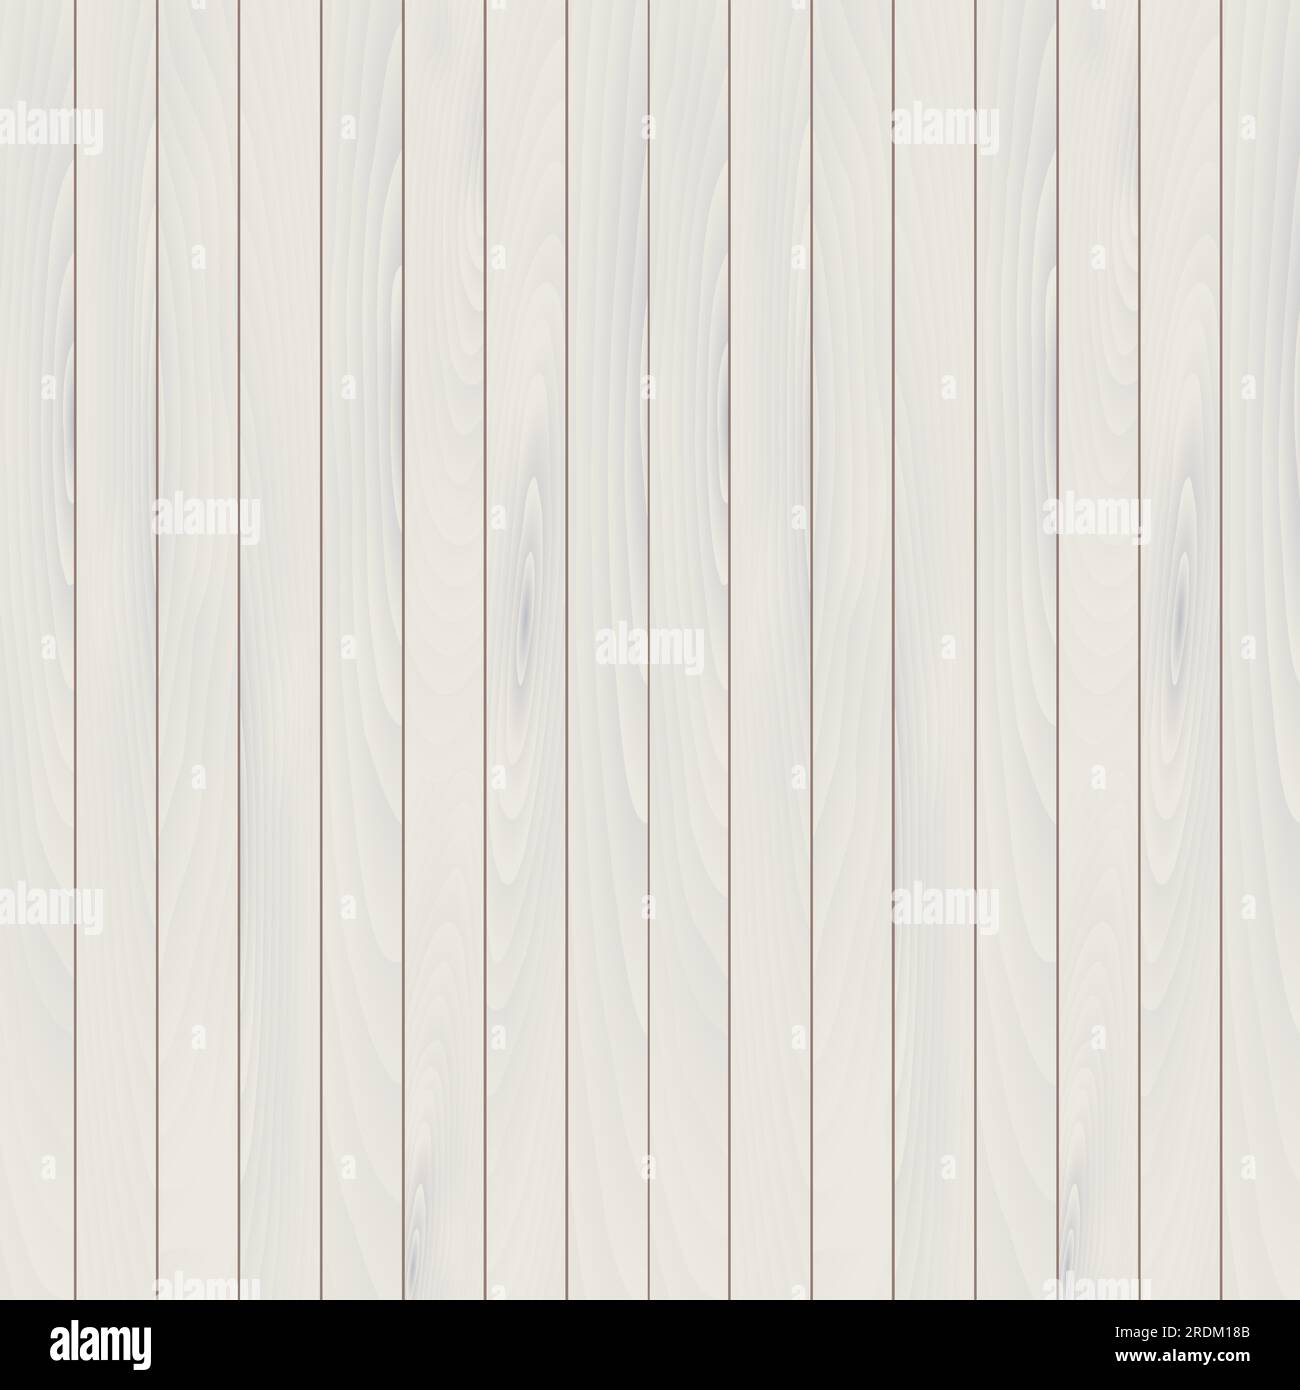 White Wooden Surface Background. Plank Wood Texture Stock Vector